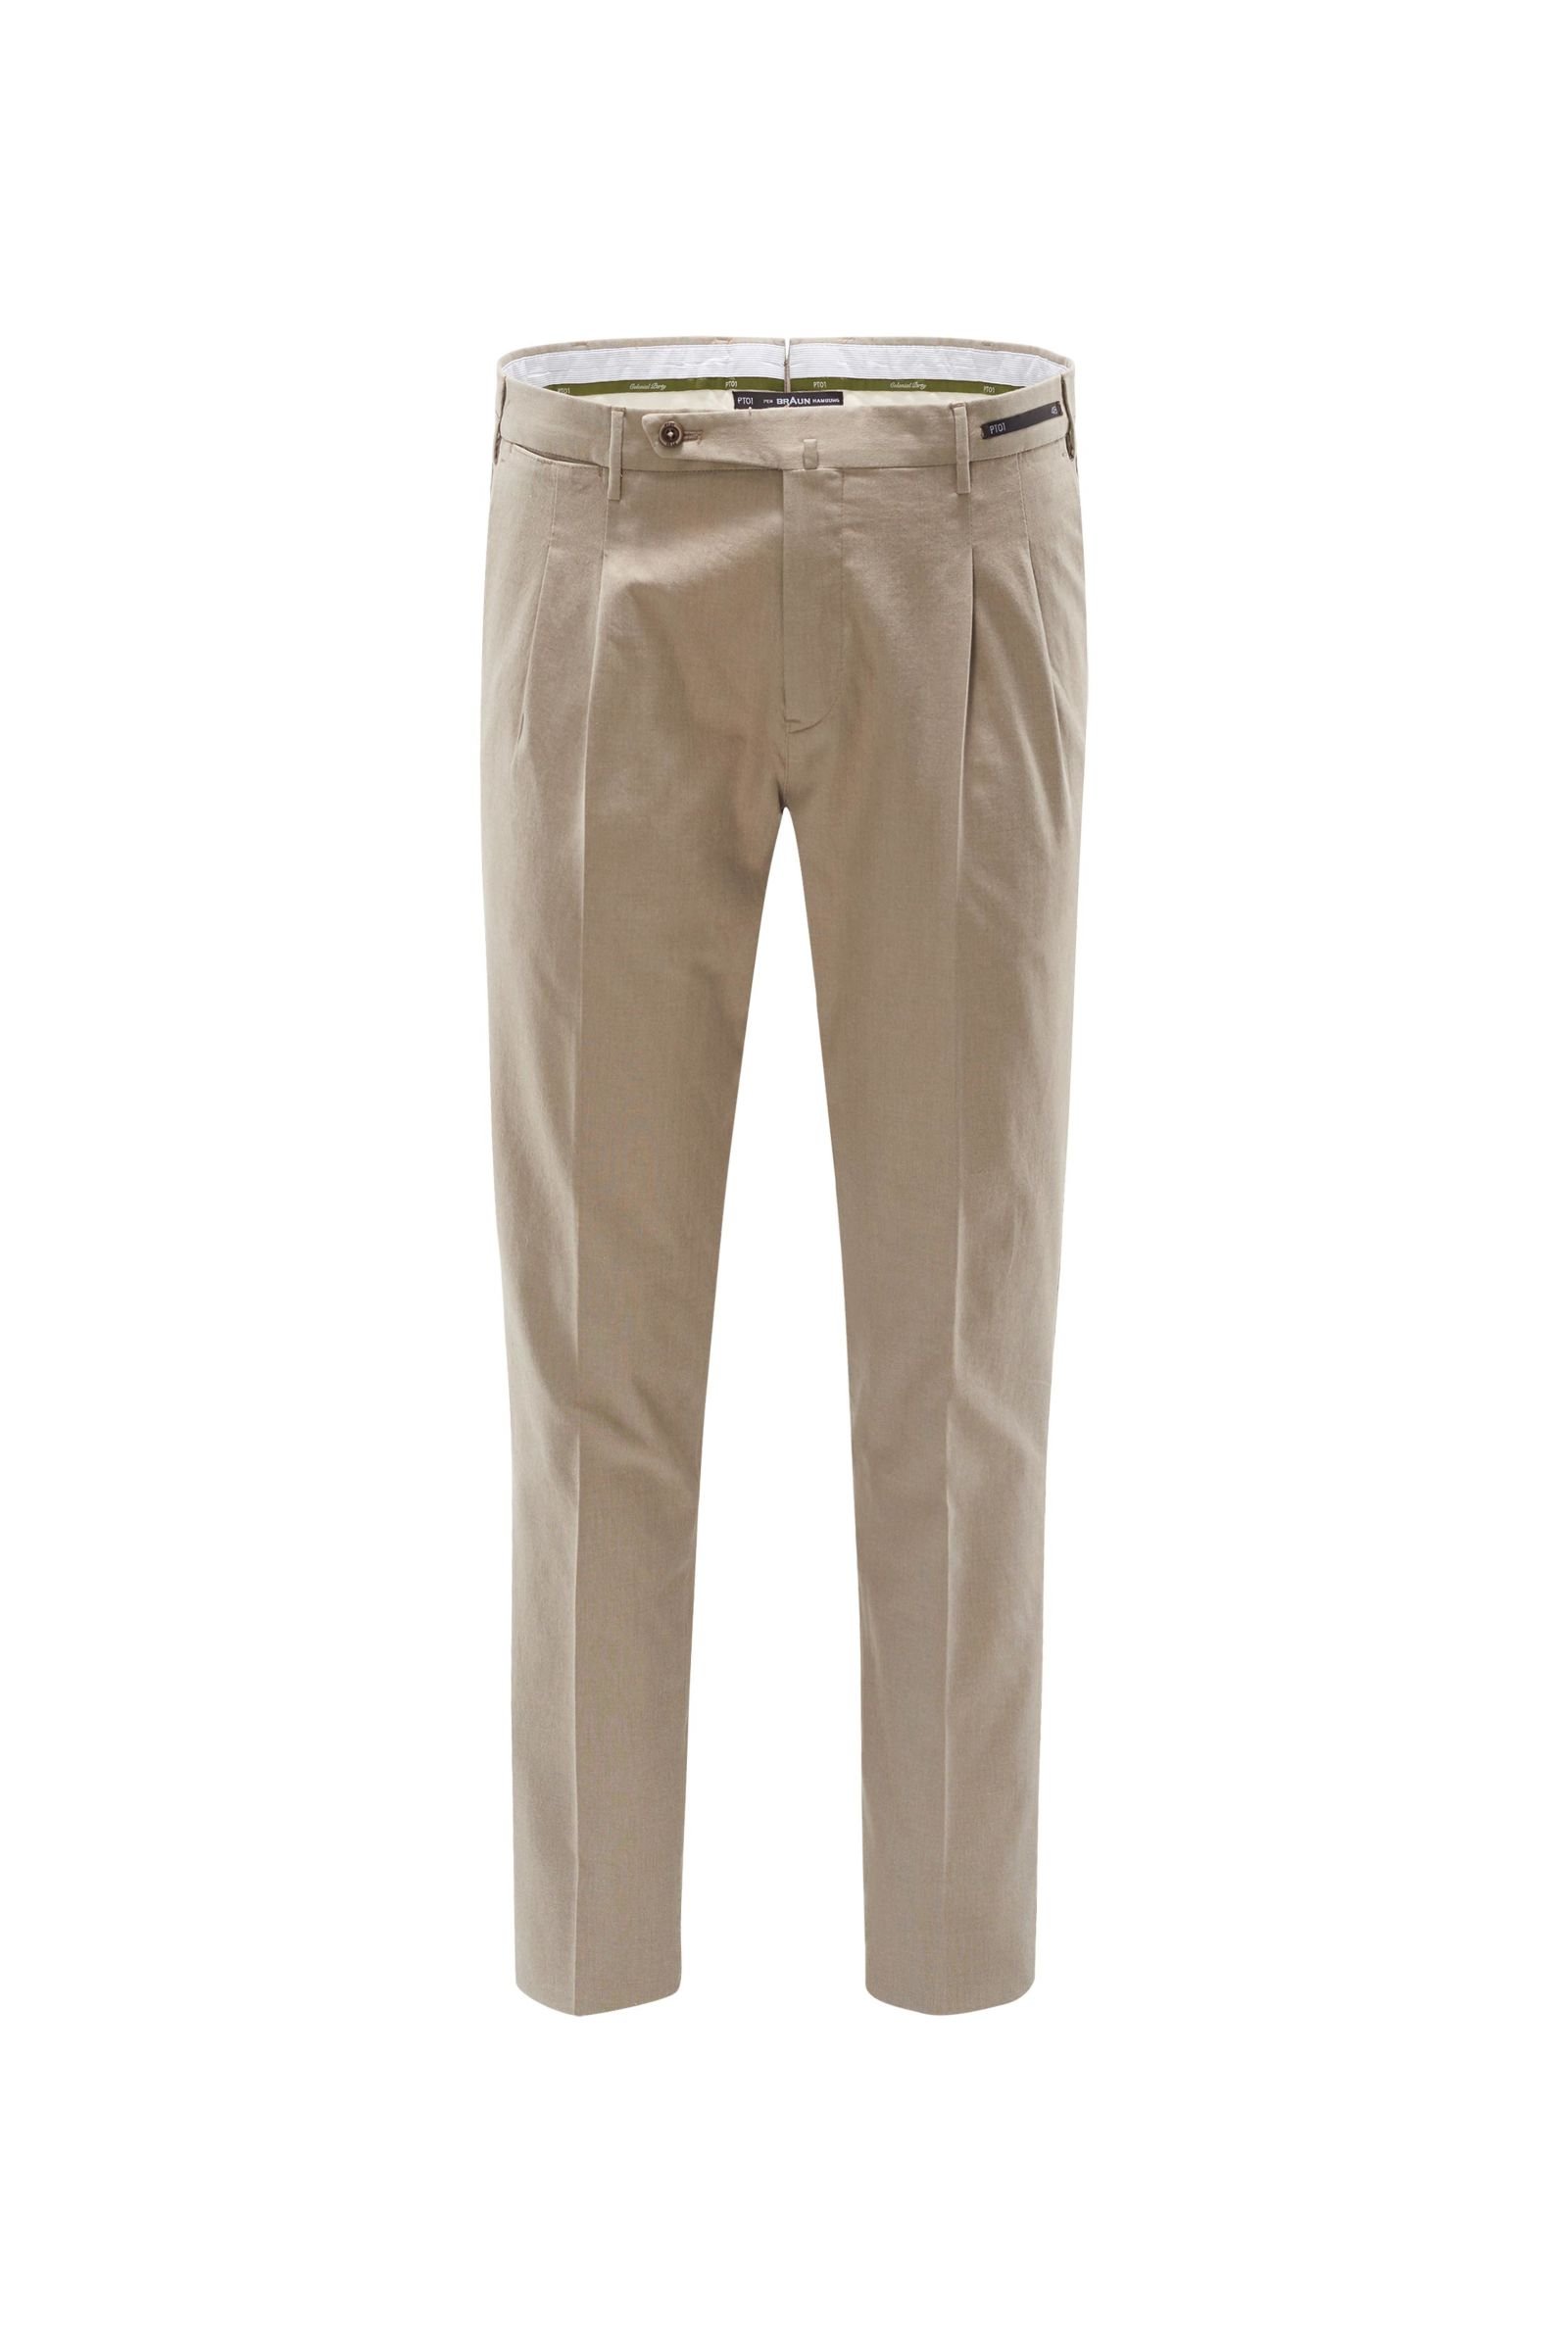 Chambray trousers 'Colonial Party Bombay Hills Preppy Fit' light brown